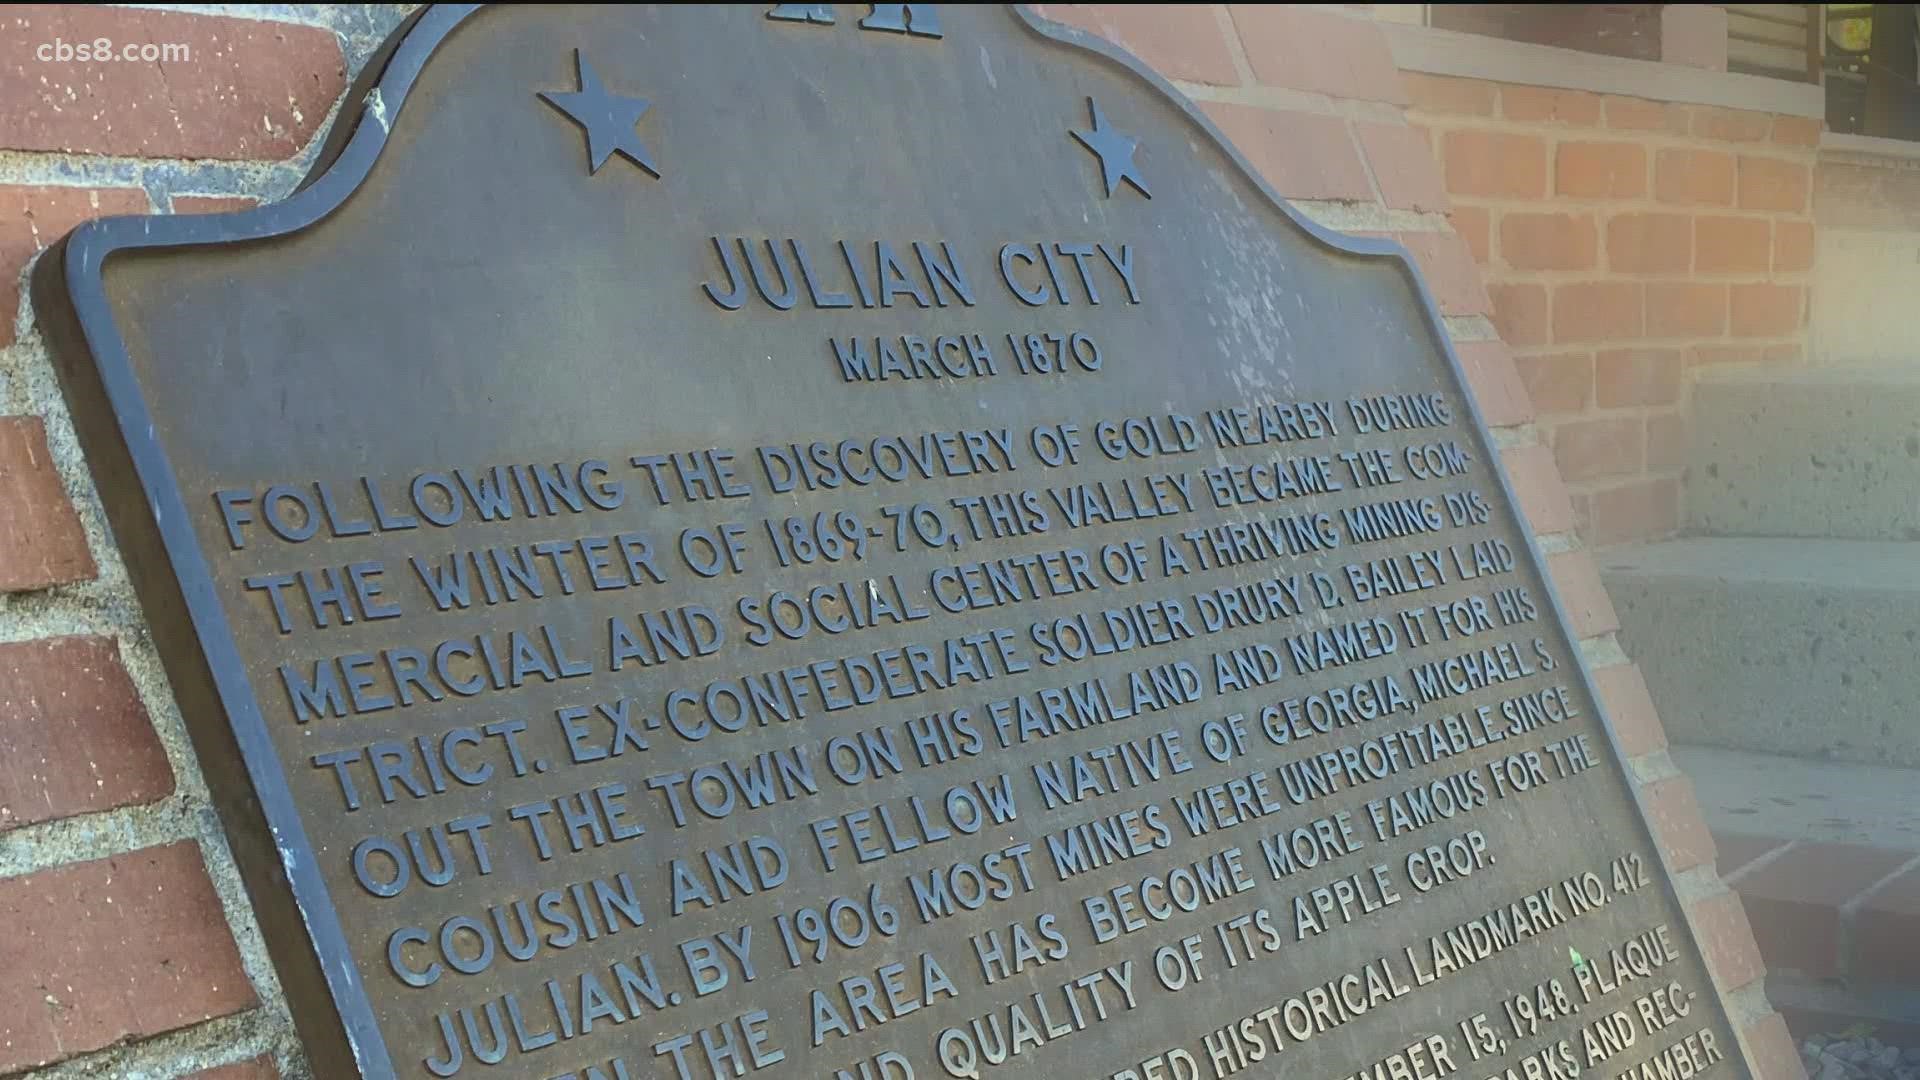 News 8 looks into the history of Julian, and what it's like today. We revisit the featured locations from the 1980s.